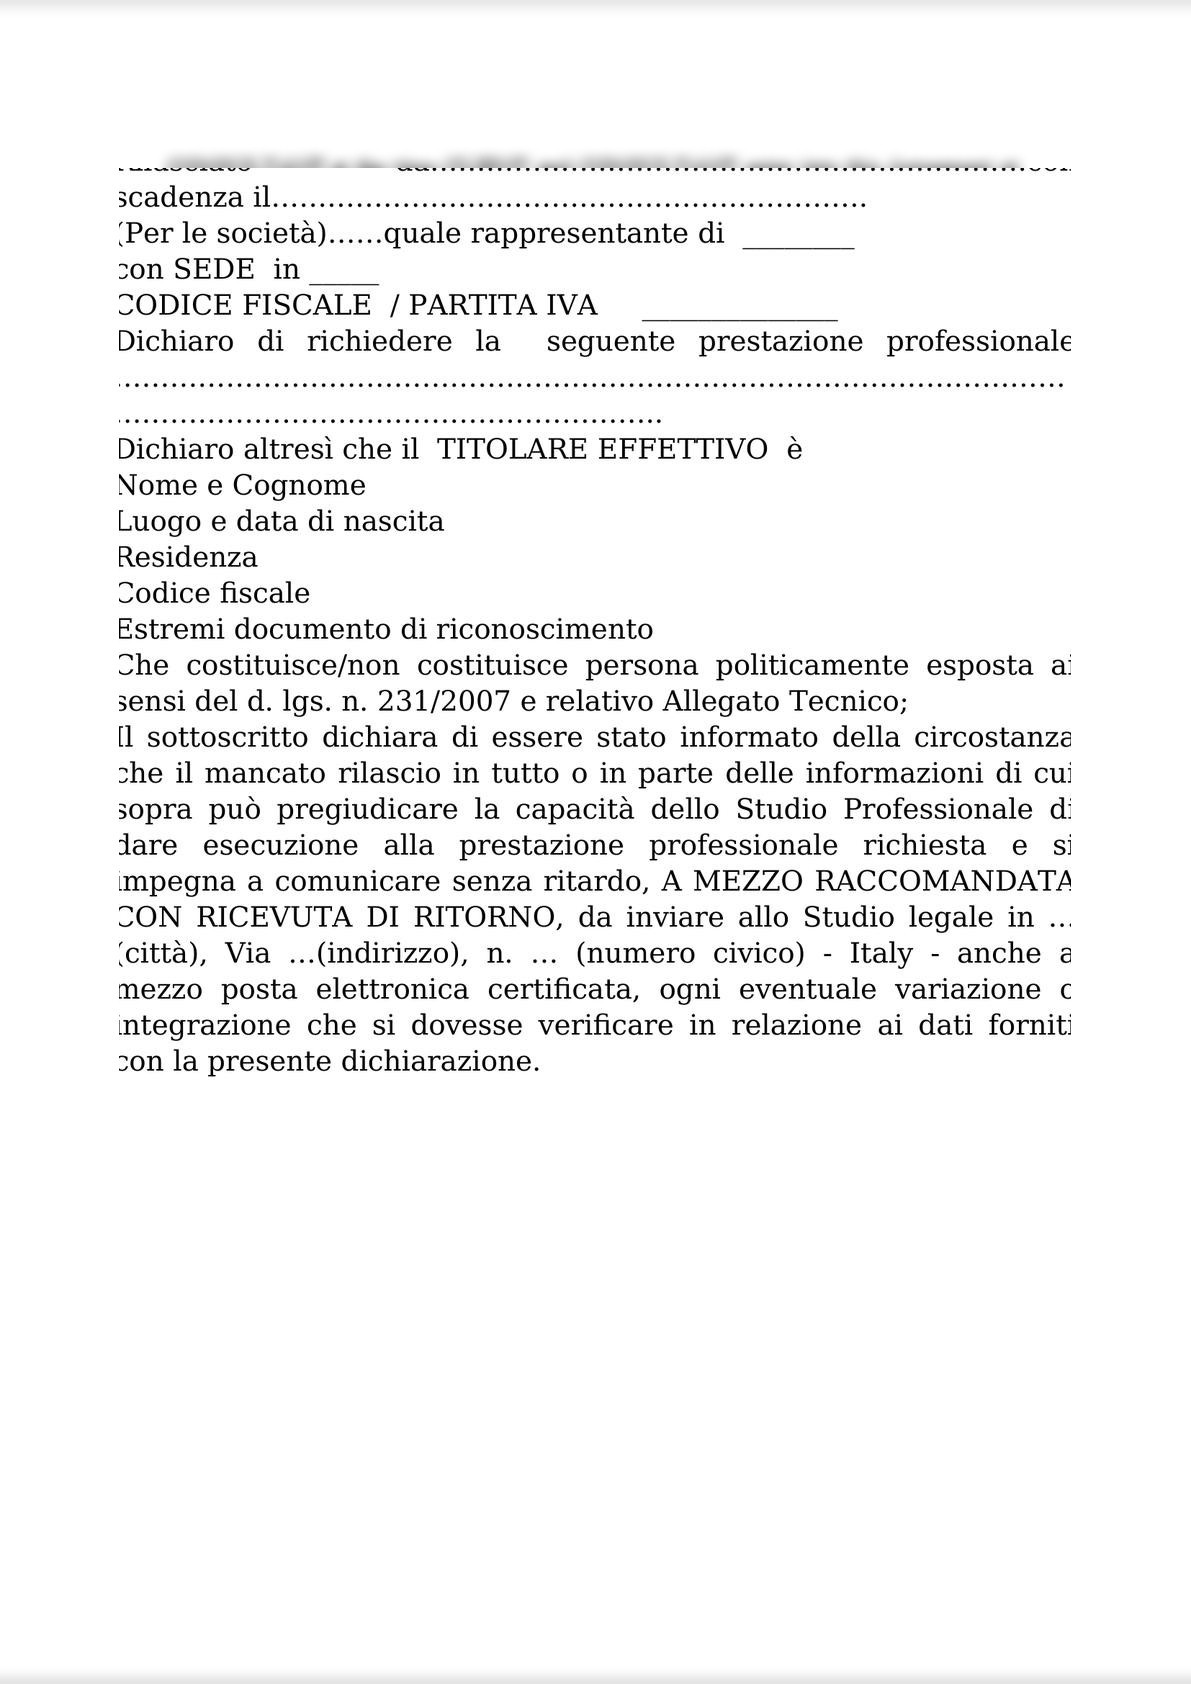 INTELLECTUAL WORK AGREEMENT FOR OUT-OF-COURT ACTIVITIES AND ATTACHMENTS 1 (PRIVACY); 2 (ANTI-MONEY LAUNDERING); AND 3 FEE QUOTE / CONTRATTO D’OPERA INTELLETTUALE STRAGIUDIZIALE-10